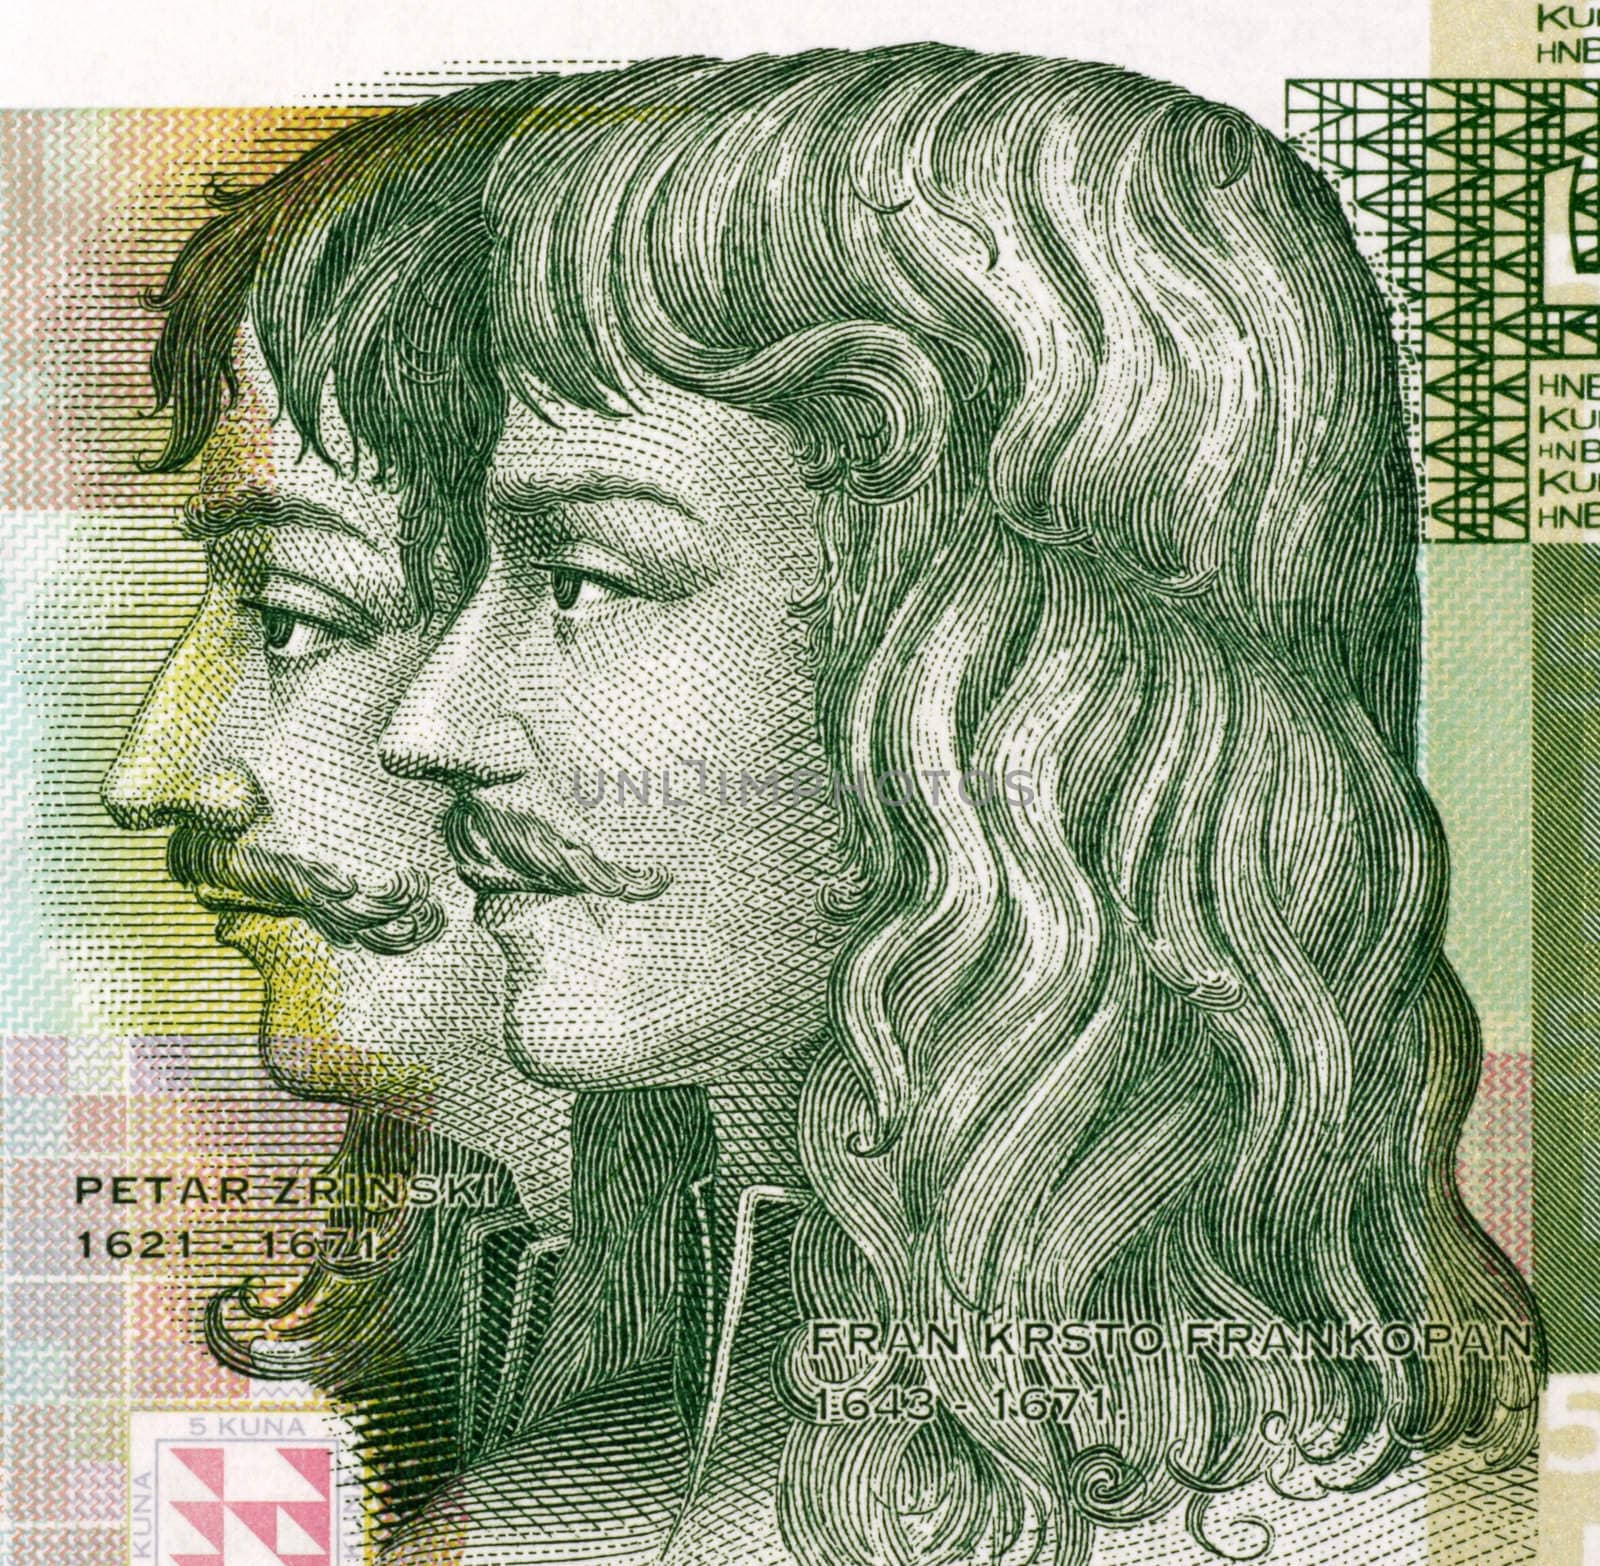 Petar Zrinski (1621-1671) and Fran Krsto Frankopan (1643-1771) on 5 Kuna 2001 Banknote from Croatia.  Attempted to throw off Habsburg and other foreign influences over Hungary and Croatia.